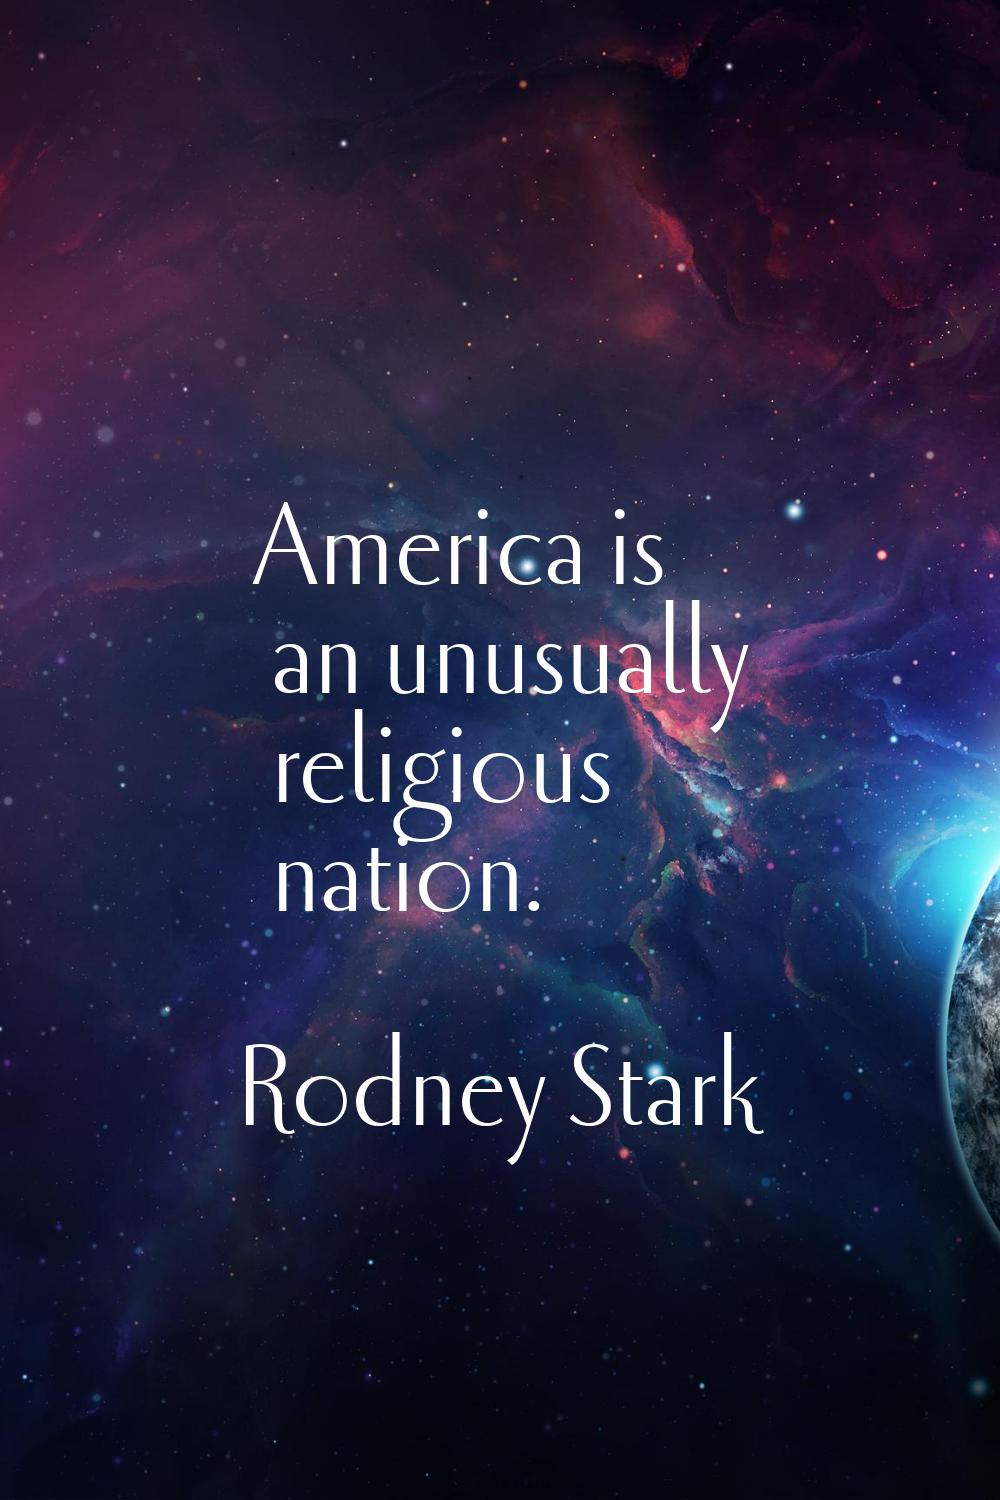 America is an unusually religious nation.